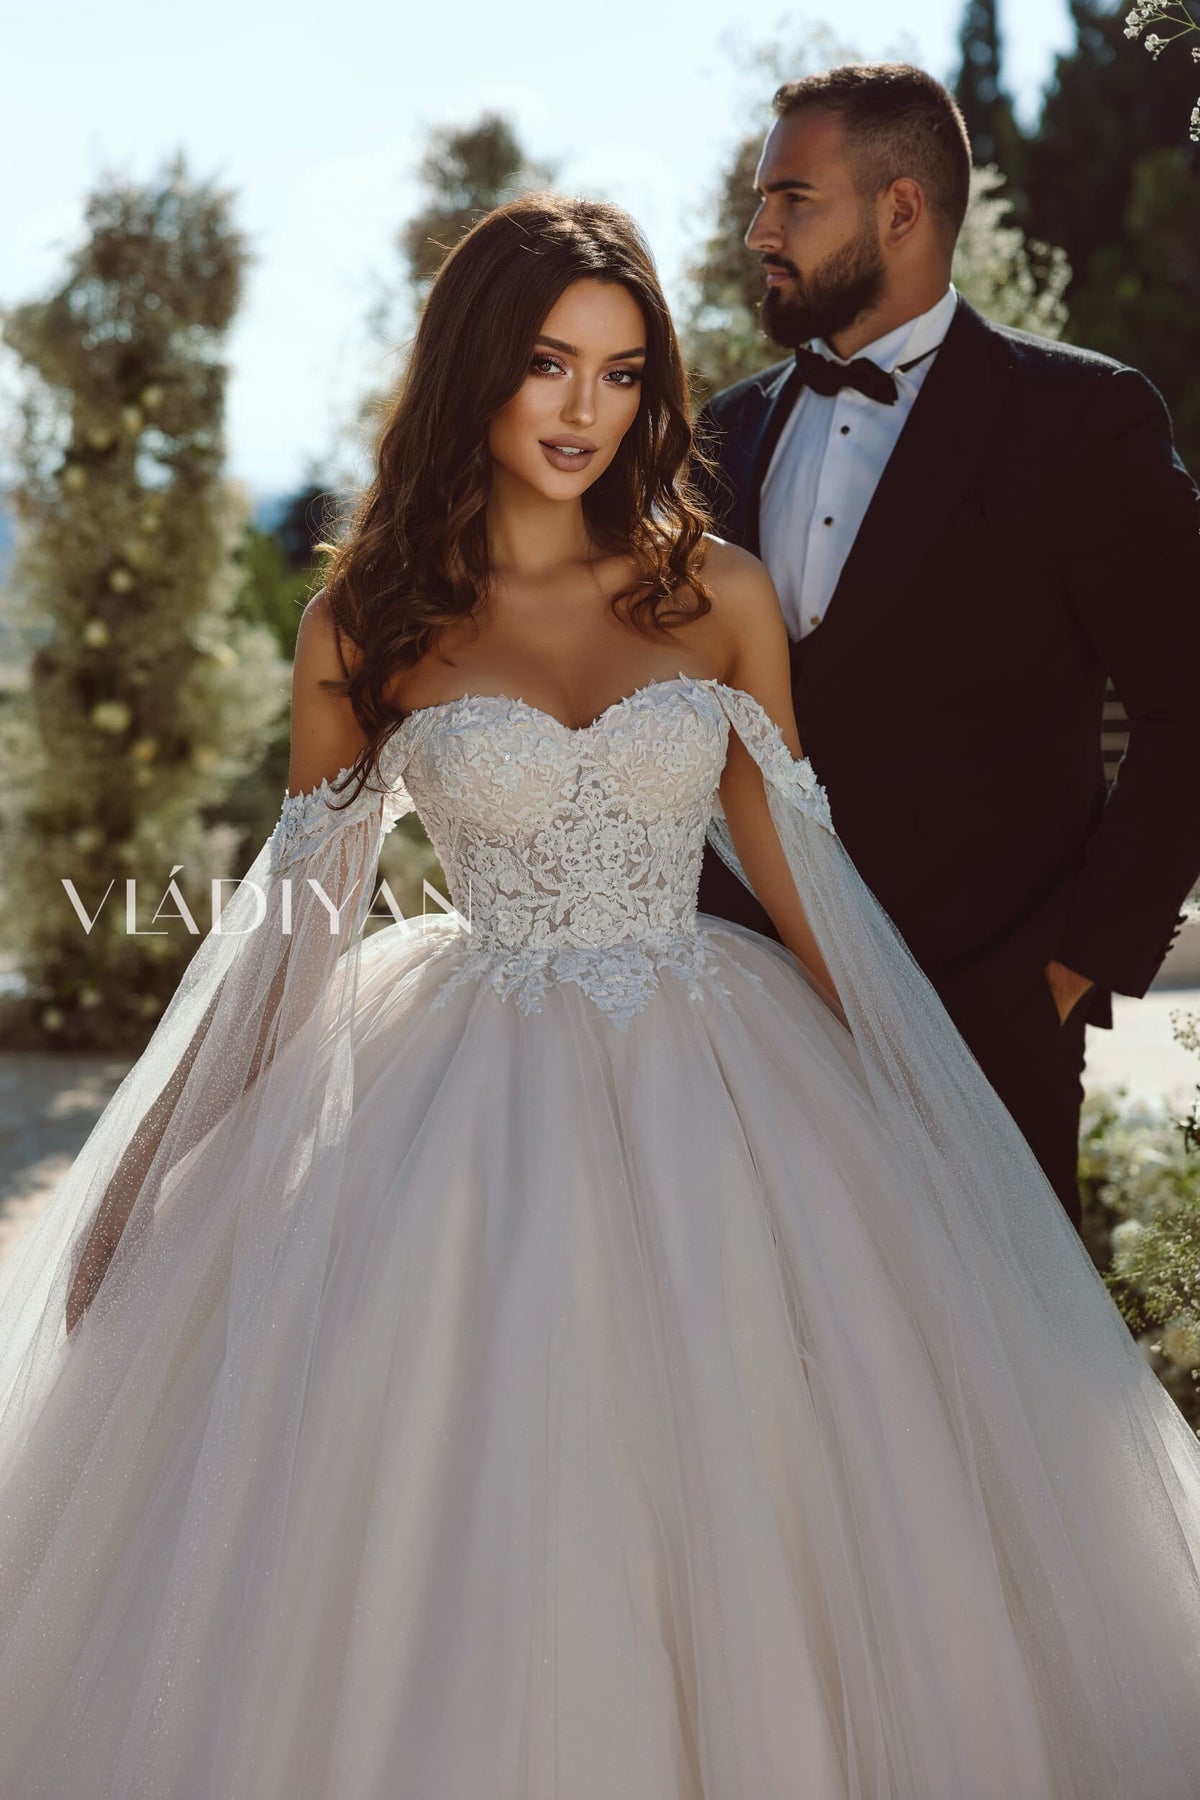 Princess Full Ball Gown Style Sweetheart Neckline Off The Shoulder Sleeves Strapless Sparkle Wedding Dress Bridal Gown Luxury Design